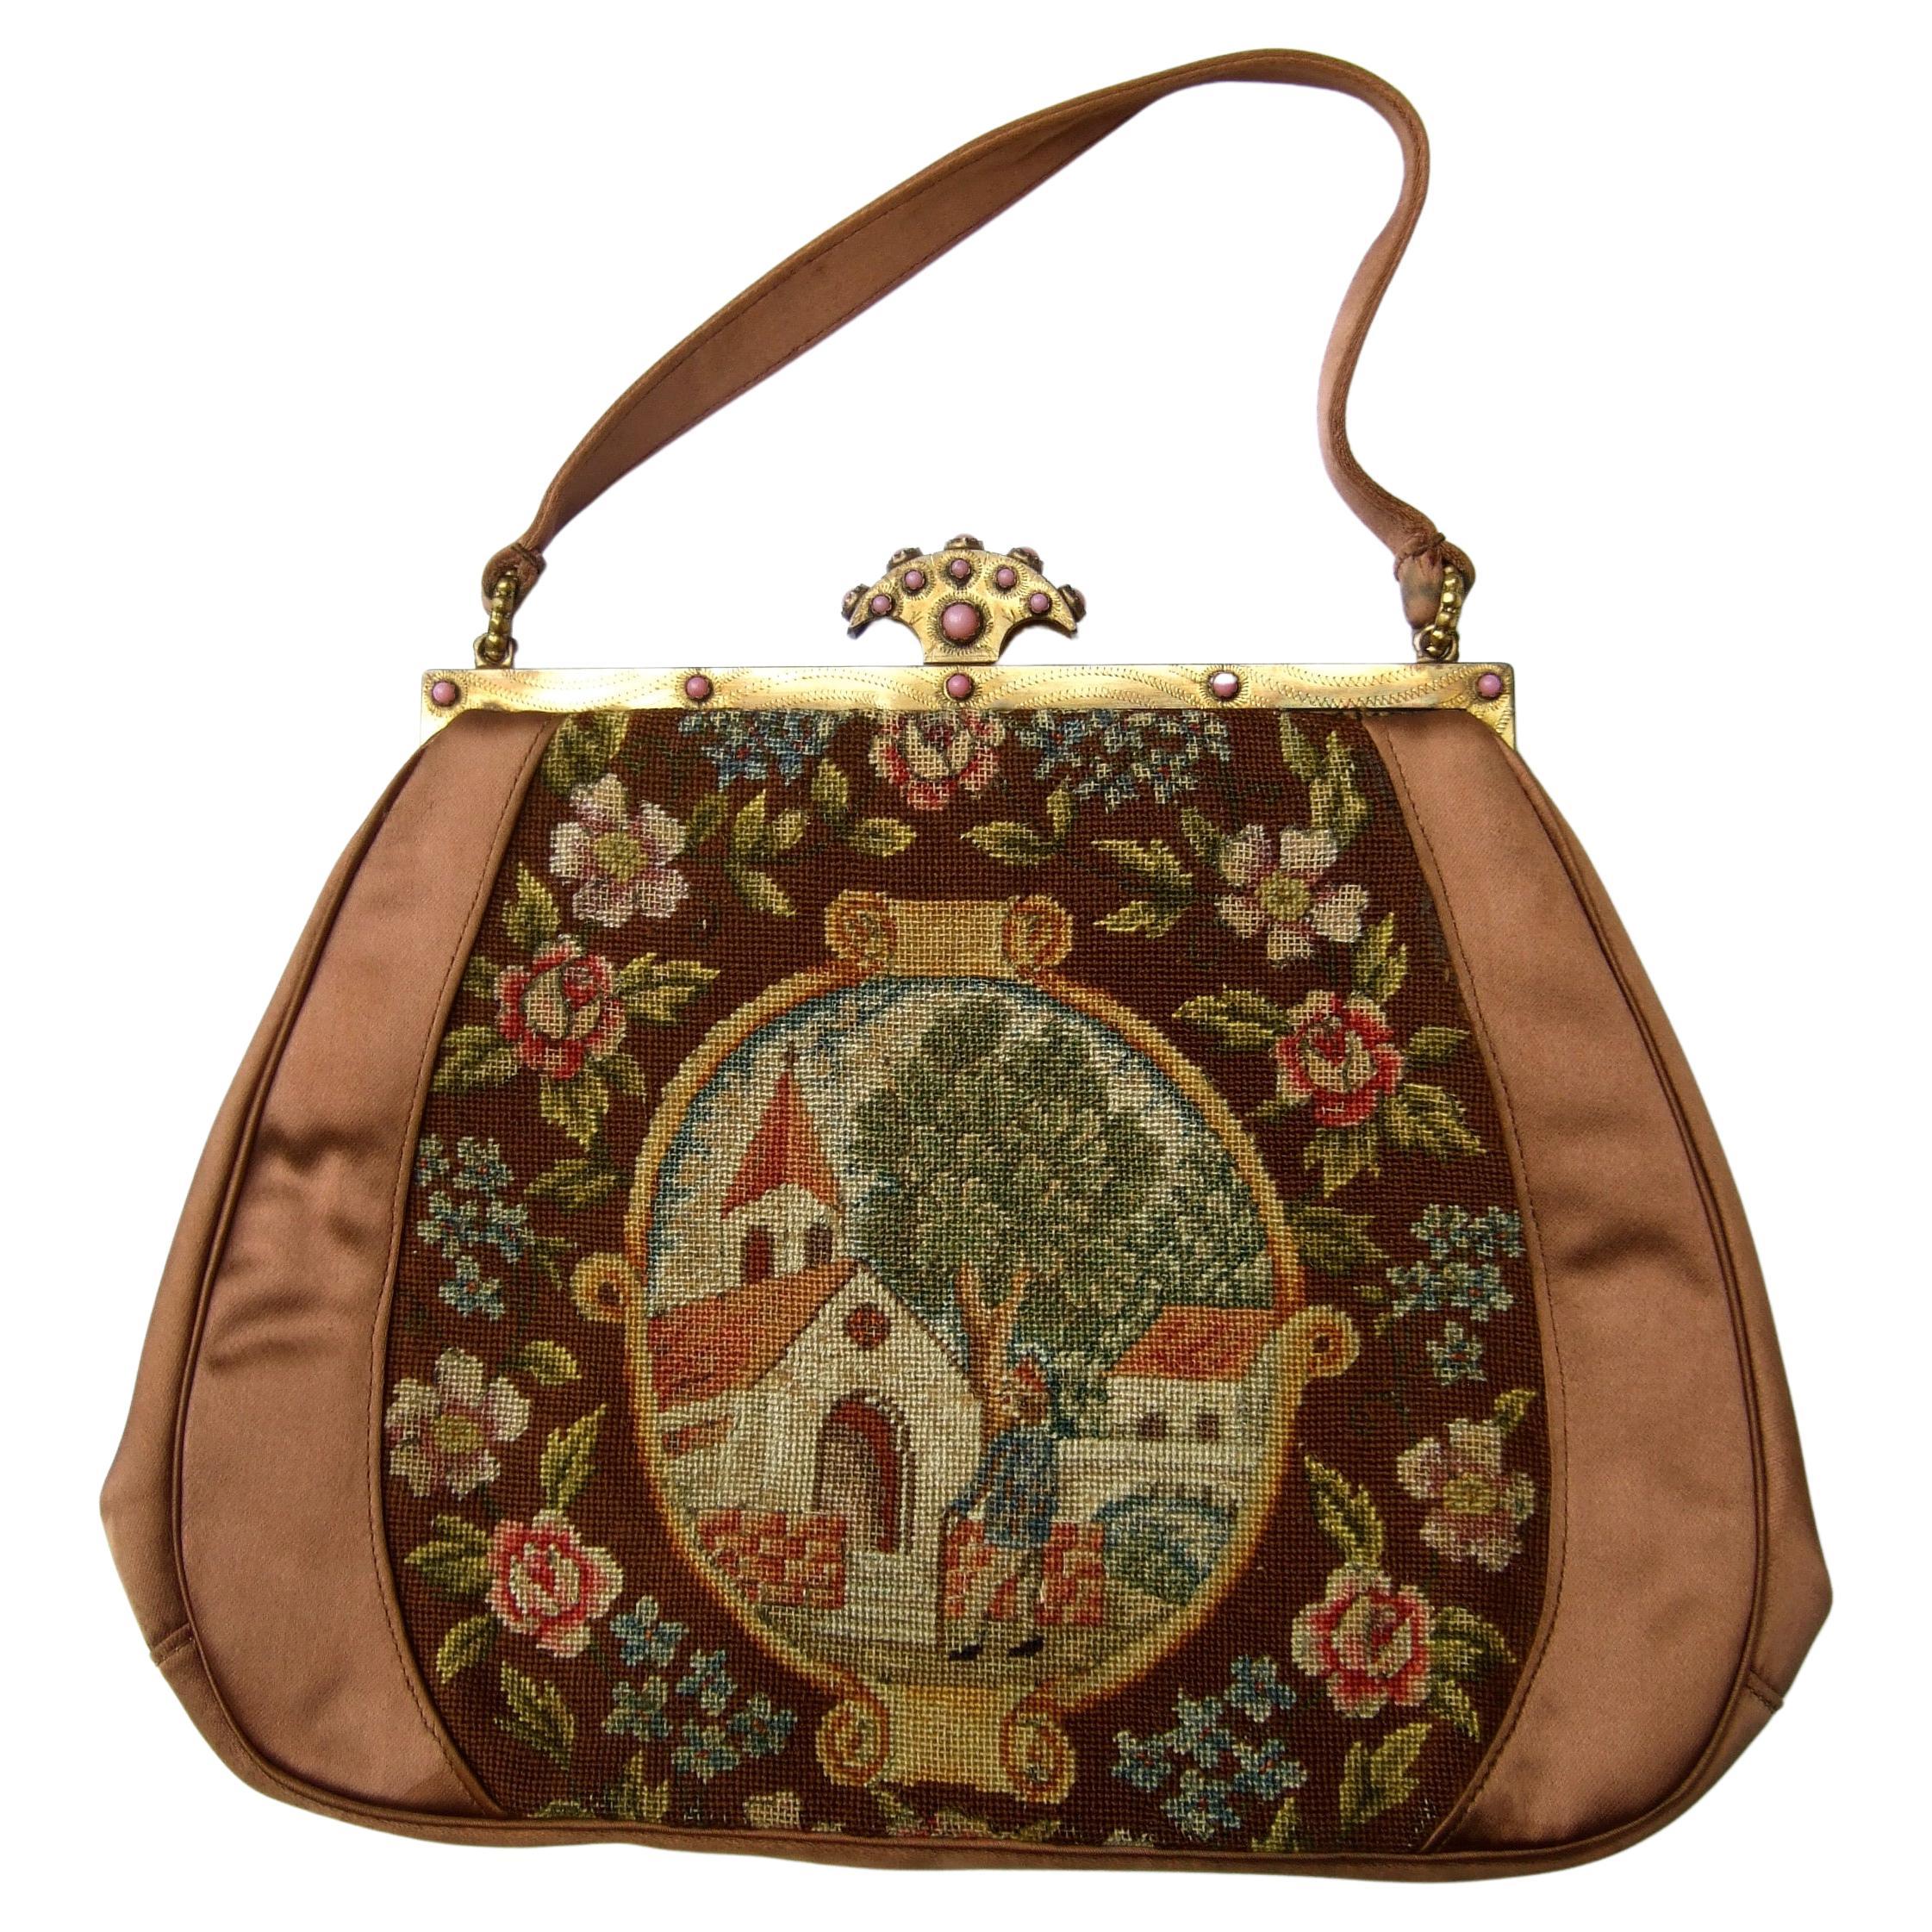 Opulent French petit point glass jeweled copper satin evening bag c 1950 
The elegant brown satin evening bag is designed with intricate petit point 
floral panels on both exterior sides. One side of the evening bag depicts 
a woman strolling